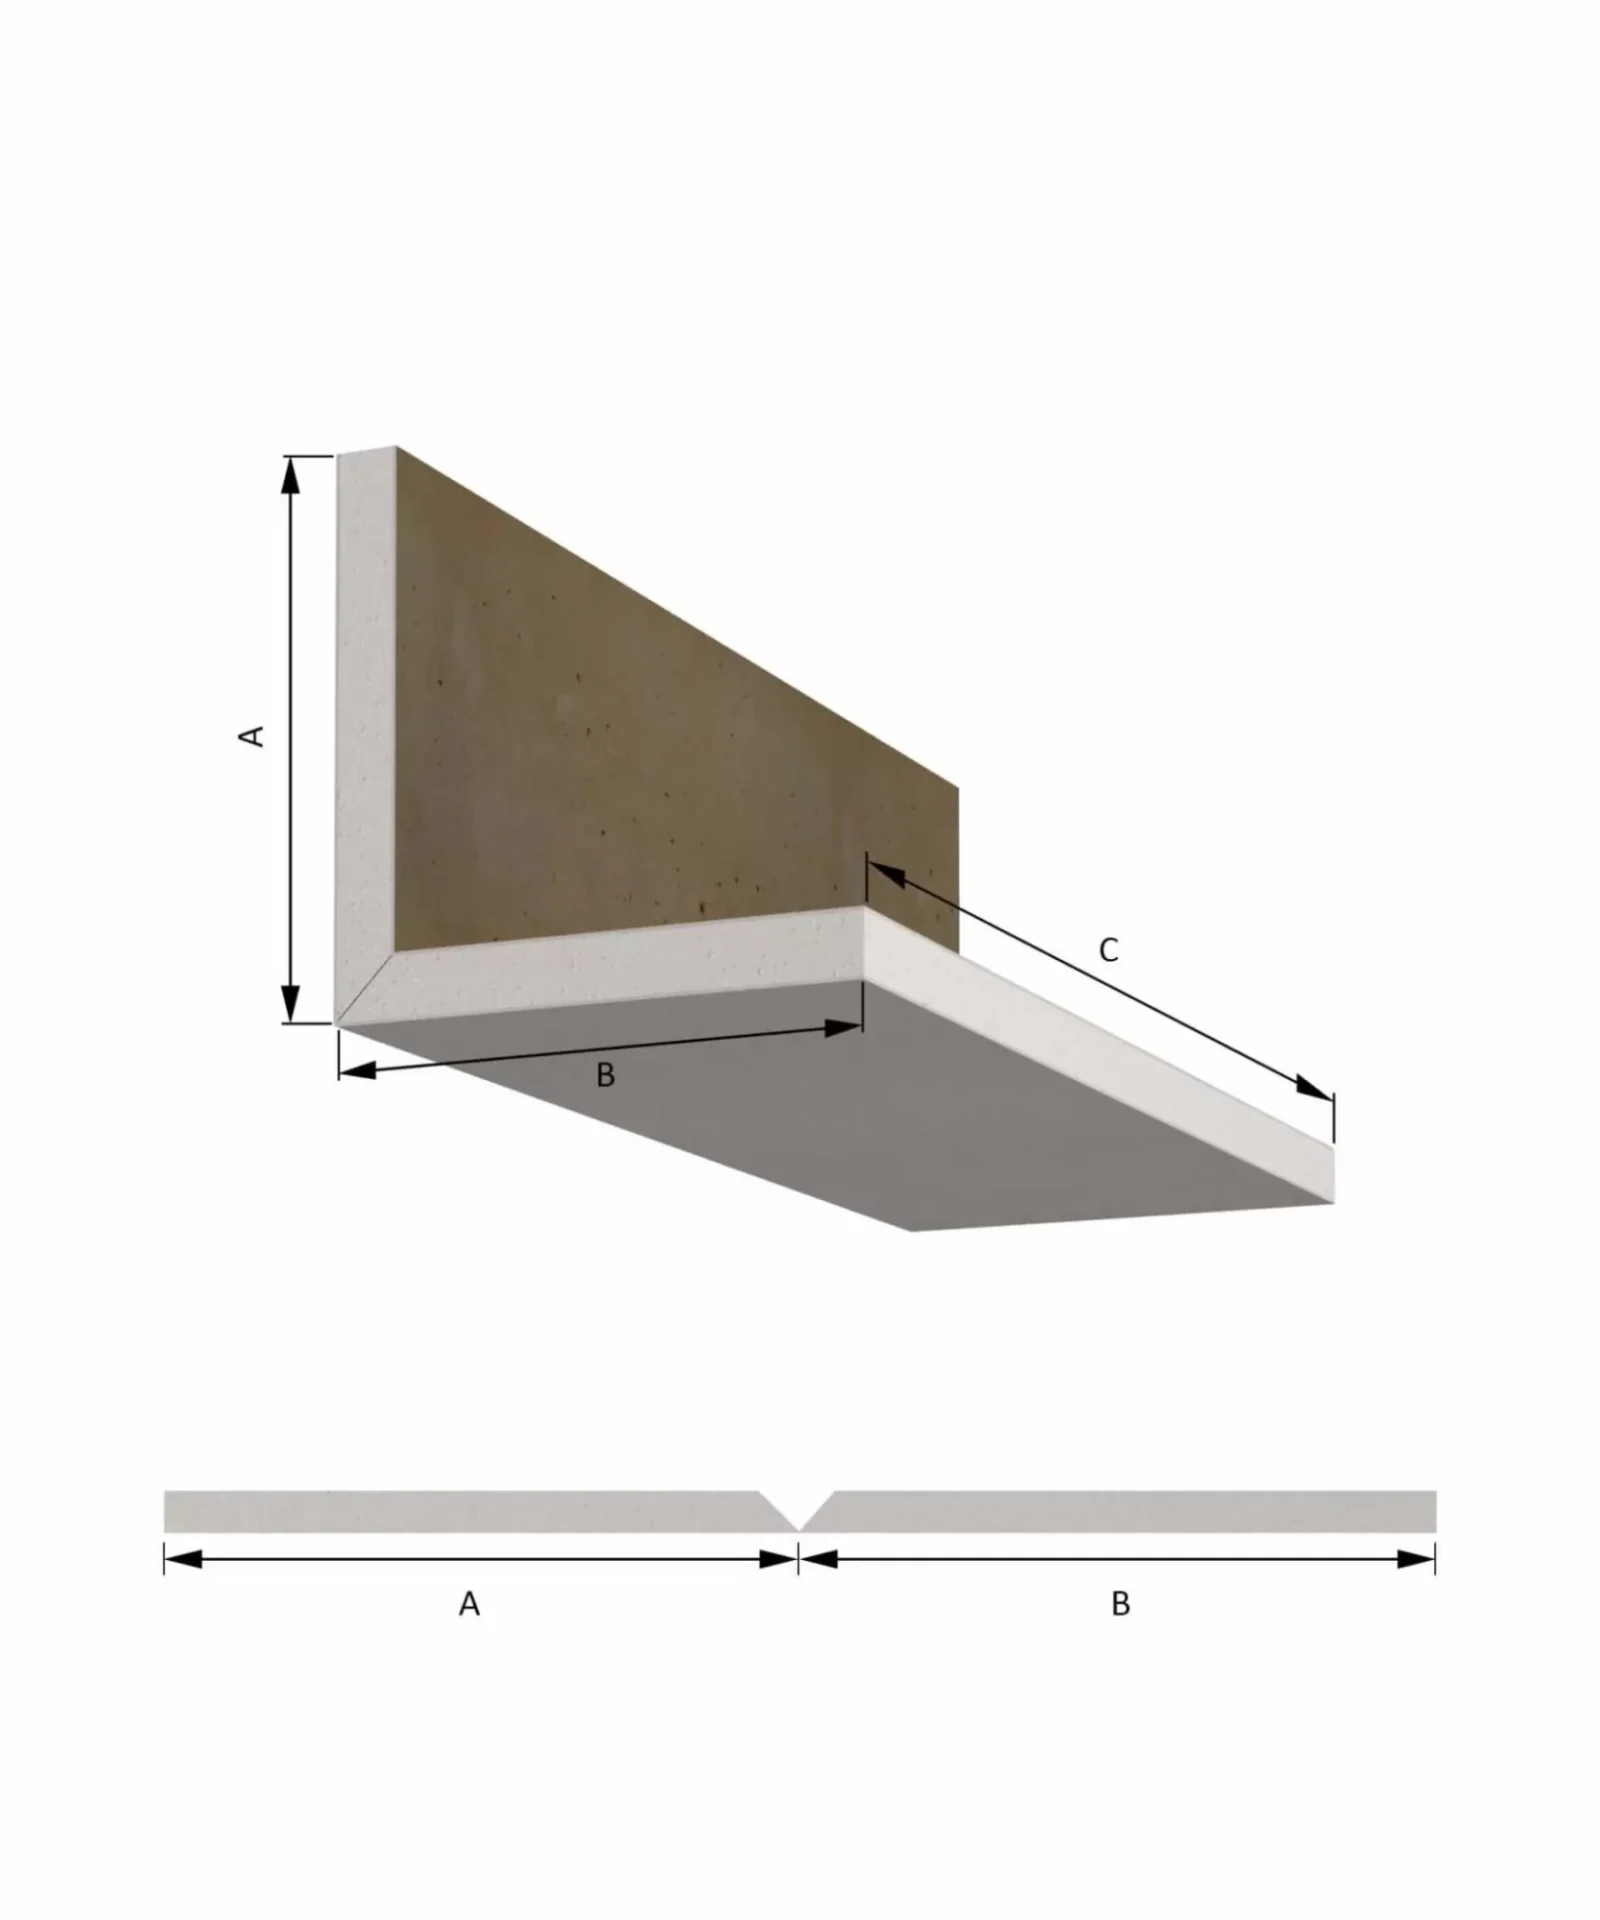 P2001-Plasterboard-L-shape-with-dimentions-scaled-1.jpg